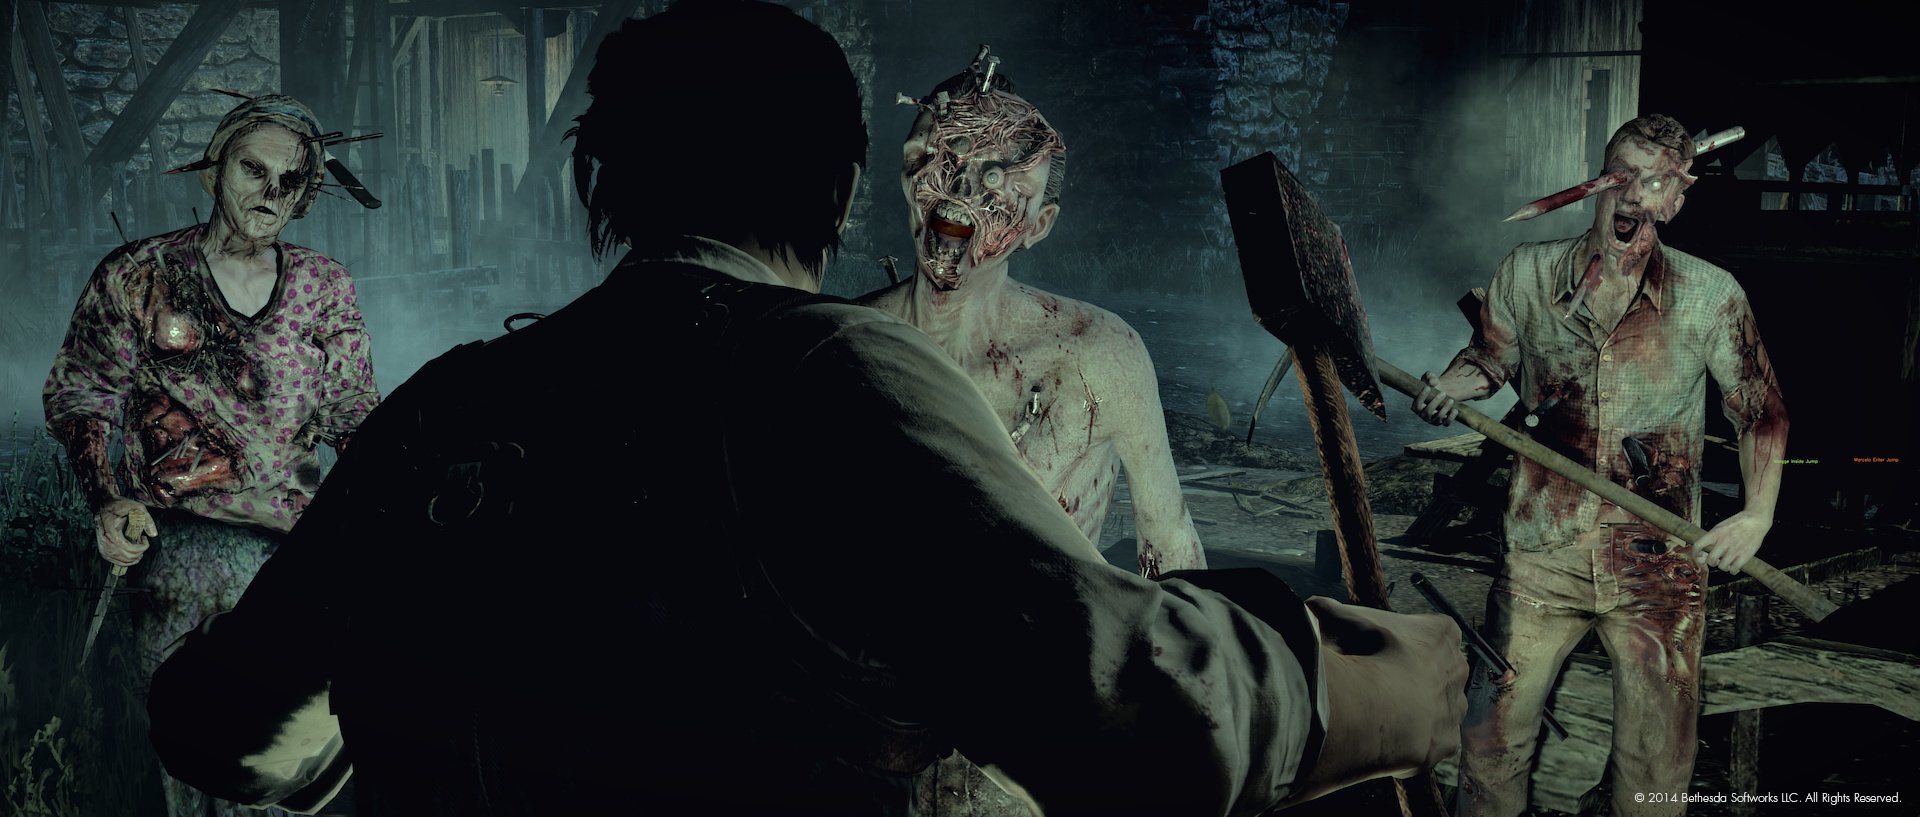 The Evil Within (PS4 / PlayStation 4) Game Profile News